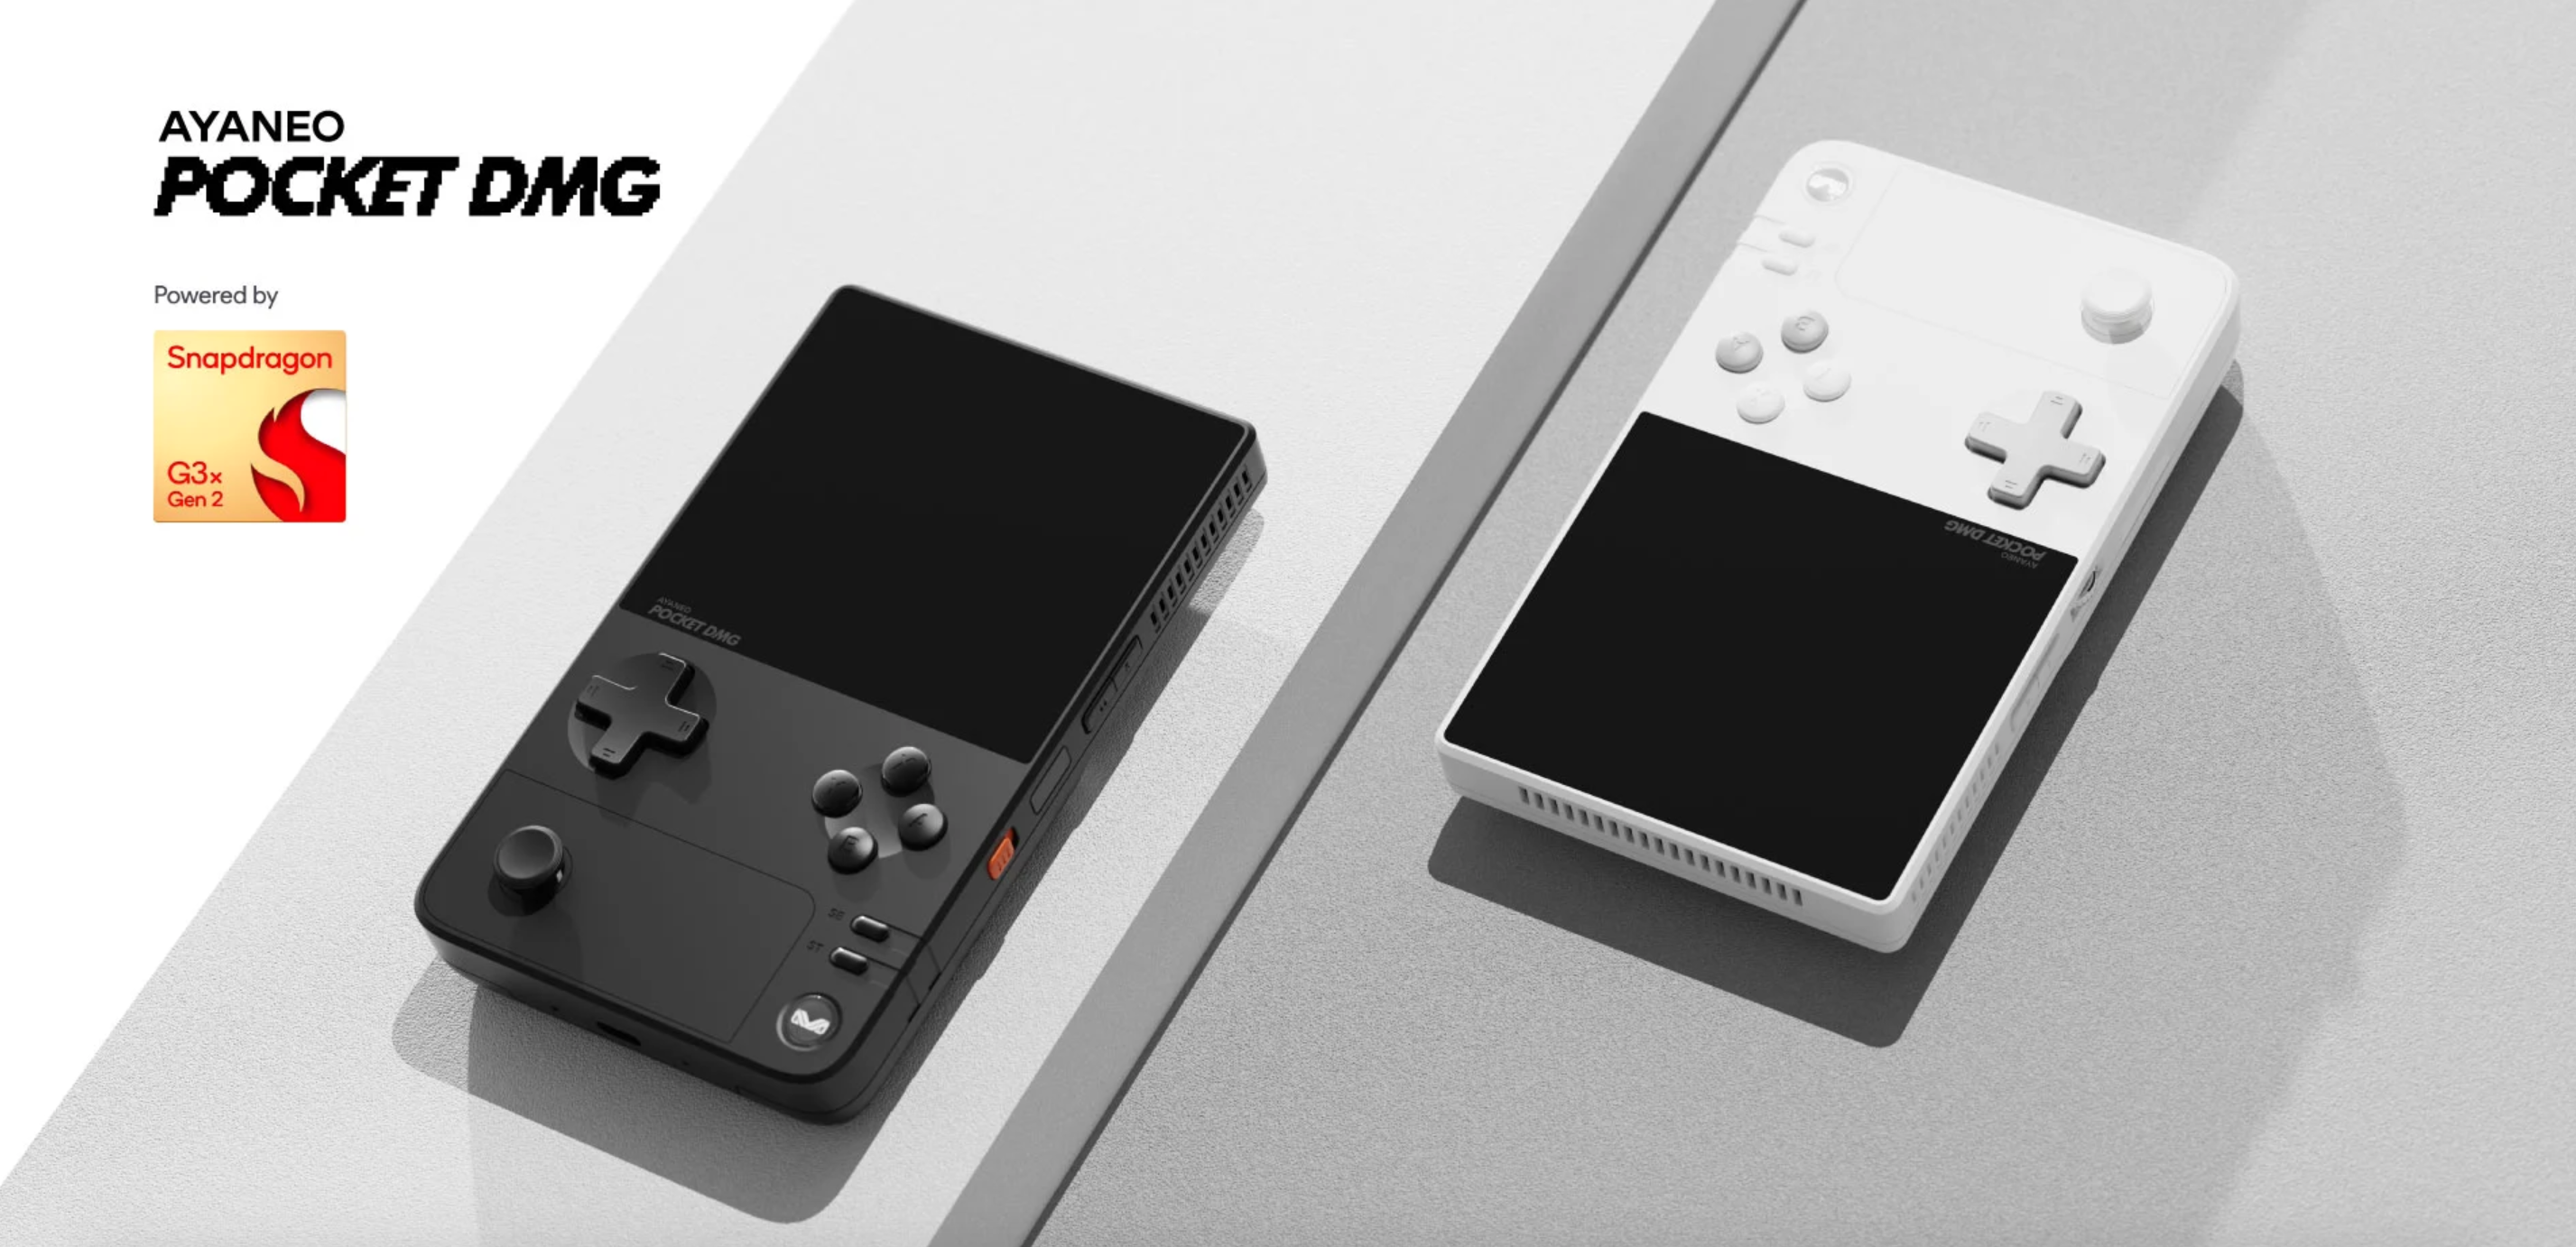 Ayaneo's latest handhelds are inspired by the Game Boy and GB Micro